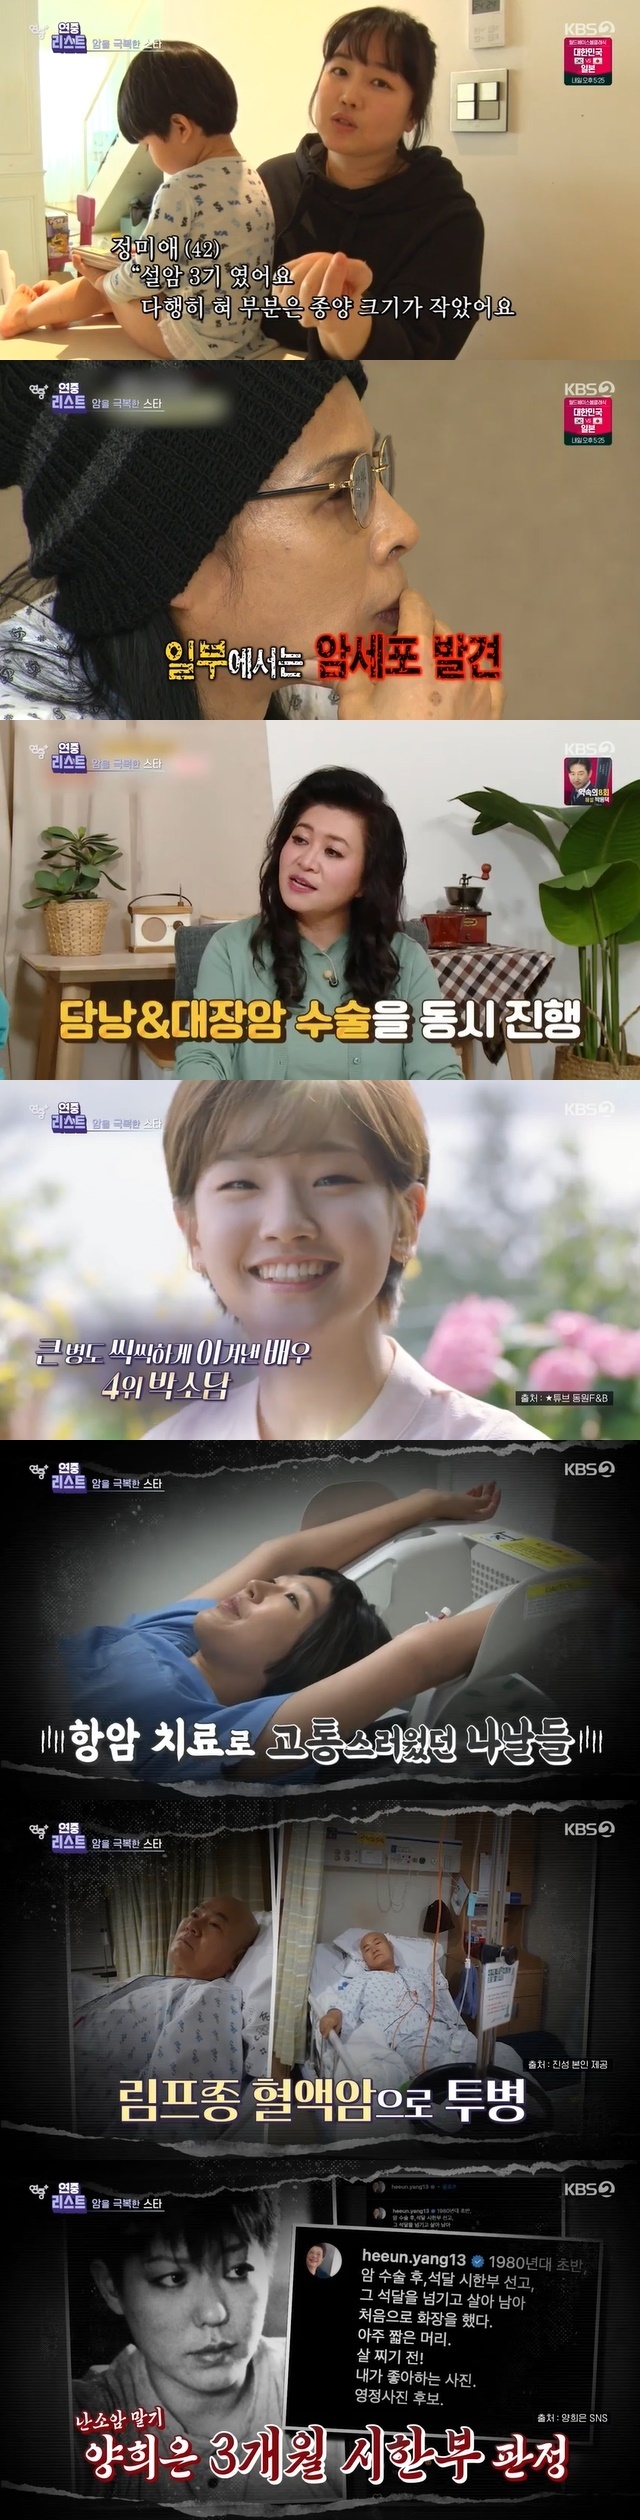 Stars who have overcome cancer have been introduced, from stars diagnosed with stomach cancer to stars who have been diagnosed with a three-month deadline.In the 123rd KBS 2TV entertainment year-round plus broadcast on March 9th, the ranking of stars who actively overcome cancer was revealed.Jung Mi-ae, who recently appeared on KBS 1TVs cultural program Human Theater, made headlines by revealing that she was diagnosed with the third stage of Seolam.Fortunately, the size of the tumor was smaller in the tongue, Jung said. At that time, I hated Husband humming next to me, she recalled.I asked him if he could sing, and he (the doctor) couldnt answer, she said after the surgery.Still, Jung Mi-ae, who overcame difficult things through her family, expressed her hopefulness, saying, I have the courage to be able to do it now.Kim Tae-won, the guitarist of the legendary rock band Resurrection, was diagnosed with dysplasia, a stage before cancer, during the filming of KBS 2TV entertainment Mans Qualification in 2011.In some cases, he was diagnosed with early gastric cancer as some cancer cells were found.Kim Tae-won recalled that the expression of the sky collapsing is not that. Above all, Kim Tae-won worried about his family.Kim Tae-won appeared on an entertainment show and said, Im not afraid of dying, but what about my beloved wife? What about my children? I was sorry to die.Fortunately, Kim Tae-won went into the operating room with the support of his wife and colleagues, and successfully completed the operation. Kim Tae-won returned to the air immediately after being healthy and impressed.In the fifth place, Dr. Oh Eun Young said, I had my first medical checkup in 2008, and I was diagnosed with a malignant tumor in my gallbladder during an ultrasound. In addition, cancer cells were found in my colon, so I had to undergo two surgeries together.Oh Eun Young said that the first person to come up at the time was his son. Son, my mother is sorry. I cried and cried and walked down the corridor.I can not see the growth of this child. I can not take the smell of this child, I can not touch this child with my hand. I could not bear it.Oh Eun Young later received a correct diagnosis that it was not gallbladder cancer. Colorectal cancer is relatively early and has recovered after treatment, and has been actively working as a certified childcare specialist to date.Actor Park So-dam, who was diagnosed with papillary cancer in 2021 when he was 29 years old and returned healthy six months after the outbreak, ranked fourth, followed by Jin-kyeong Hong, who was diagnosed with ovarian cancer and survived chemotherapy.Jin-kyeong Hong also used a wig because his head was exhausted during chemotherapy.Jin-kyeong Hong said in a broadcast, I do not know what chemotherapy felt like. I ate three bottles of shochu and got a hangover, and I had a cold. I ate rice cake there. But someone stepped on me on the way.The conclusion should not hurt, he said.Jin-kyeong Hong said, I downloaded the entertainment. I really laughed and laughed, and after seeing a few of them, the treatment was over for three hours. I was working philosophically in giving laughter.I am very proud that I am an entertainer. 